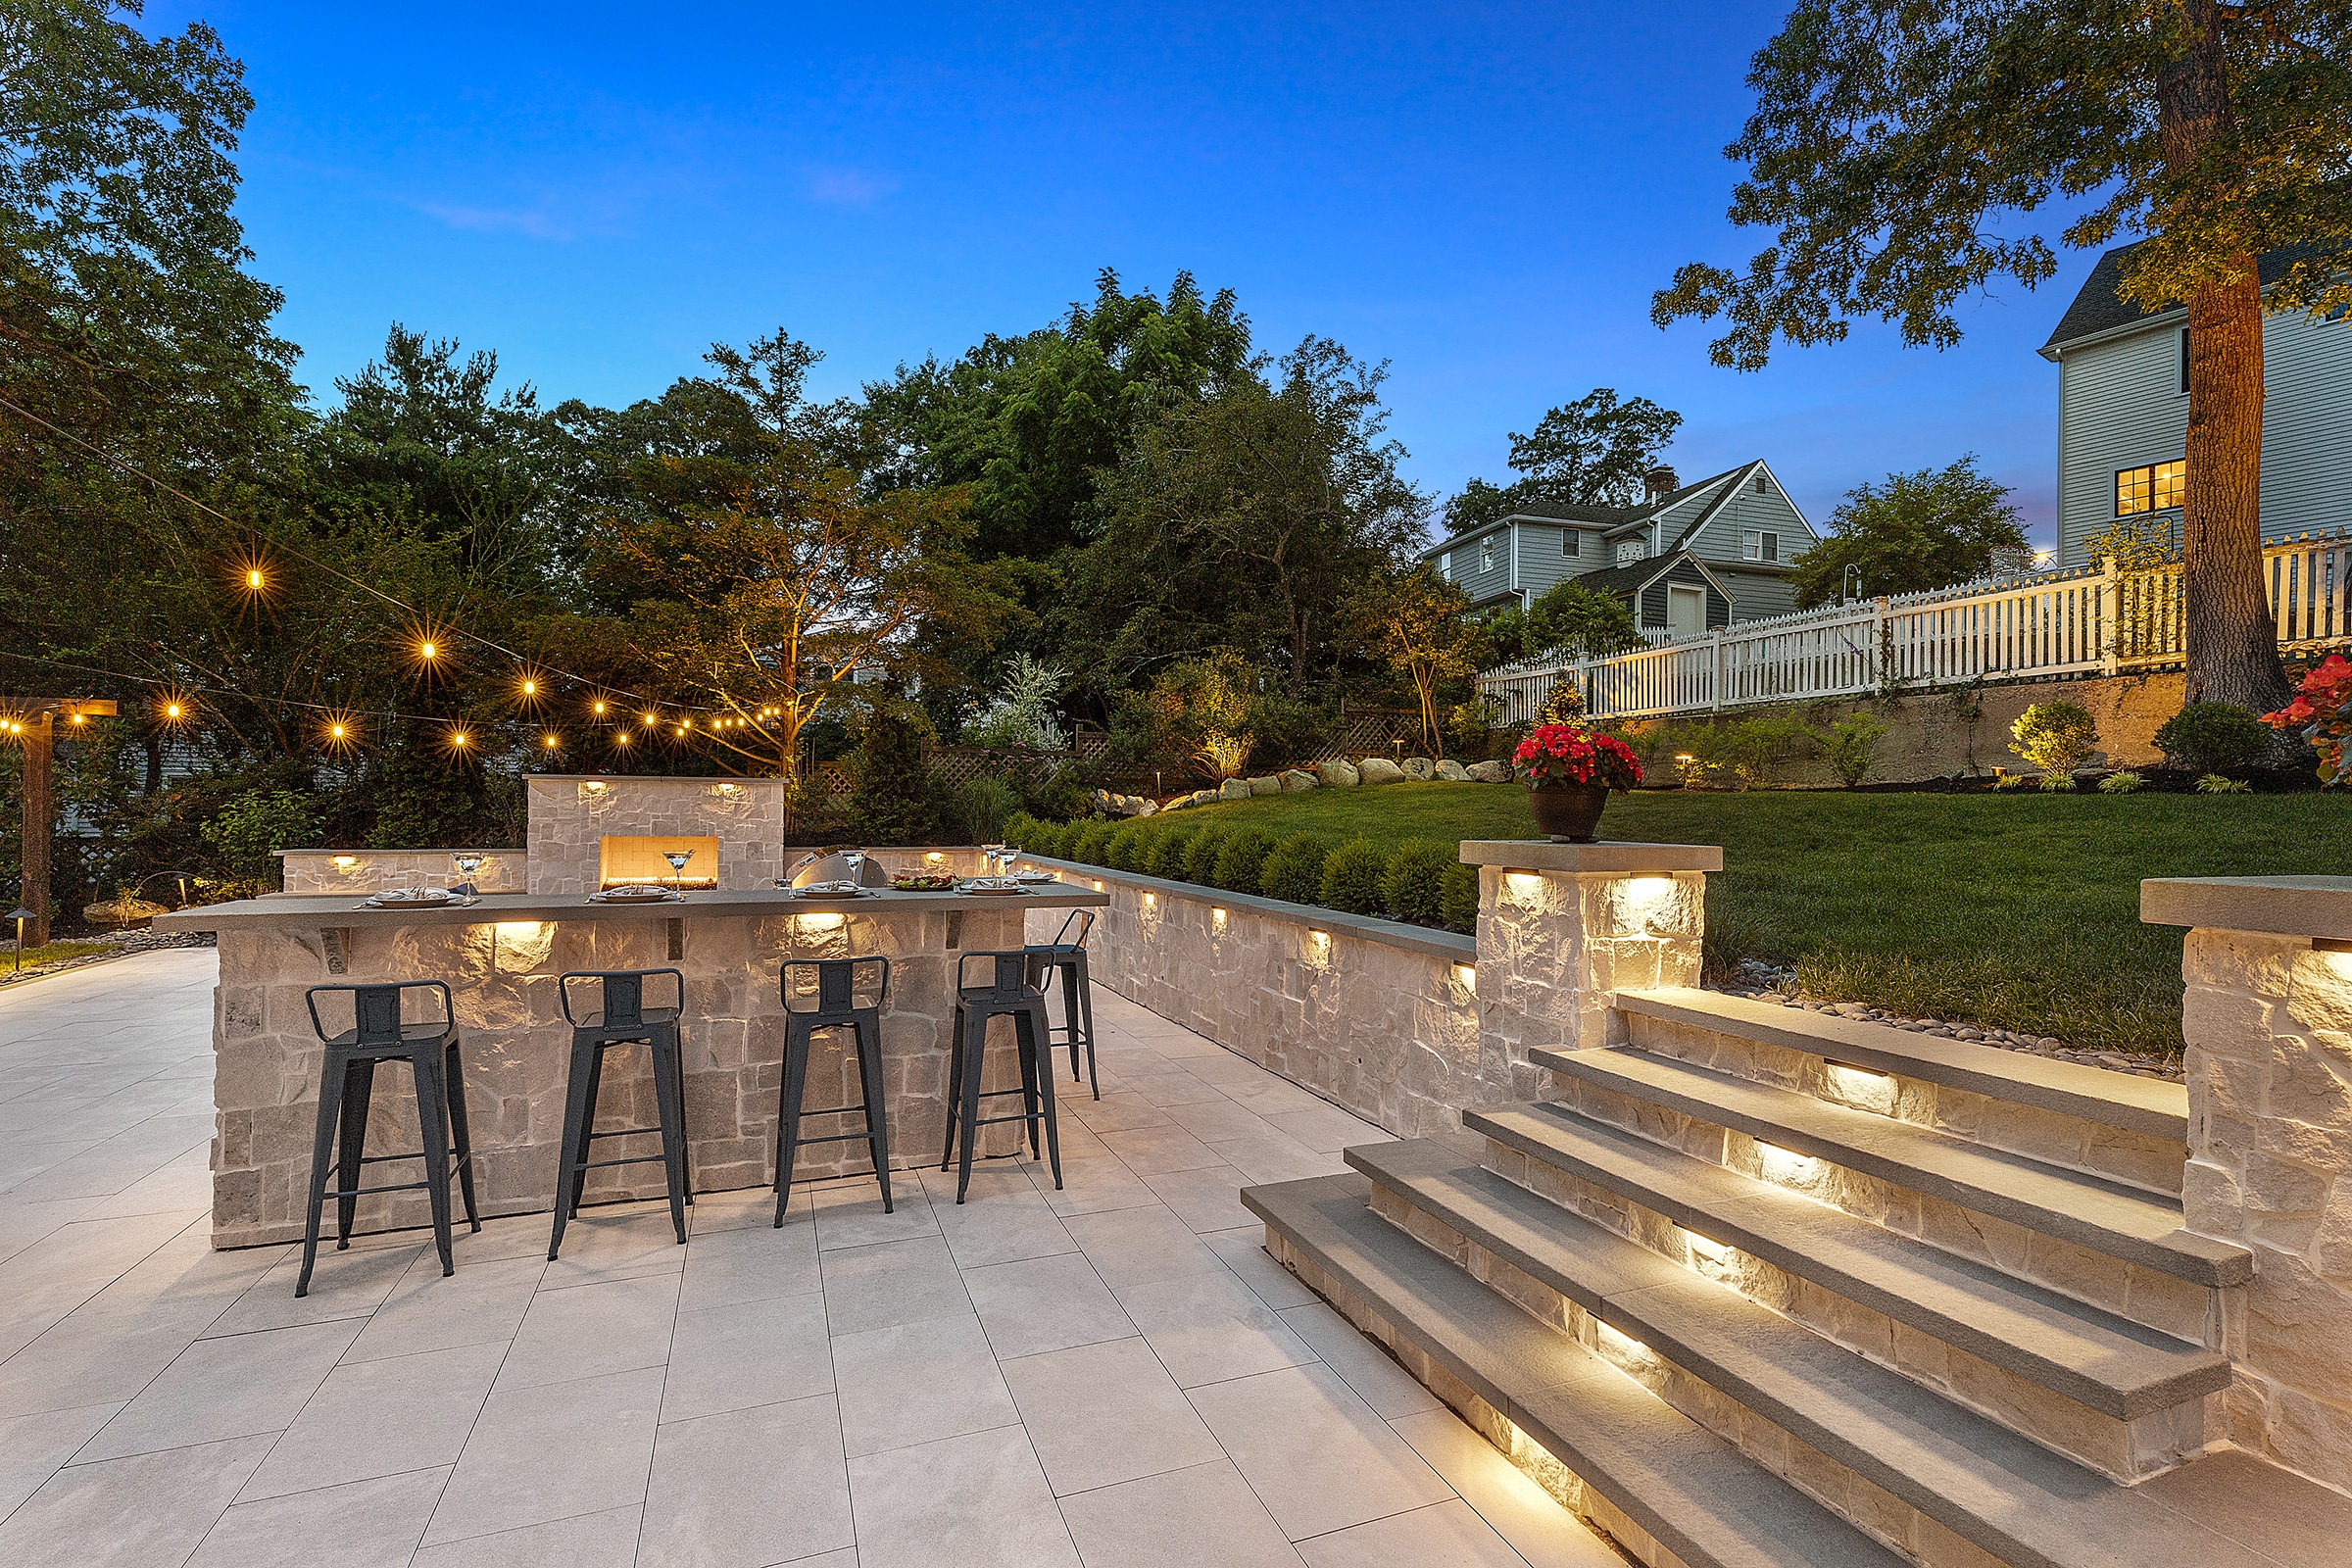 Outdoor Kitchen, stone stairs, and outdoor fireplace at dusk.